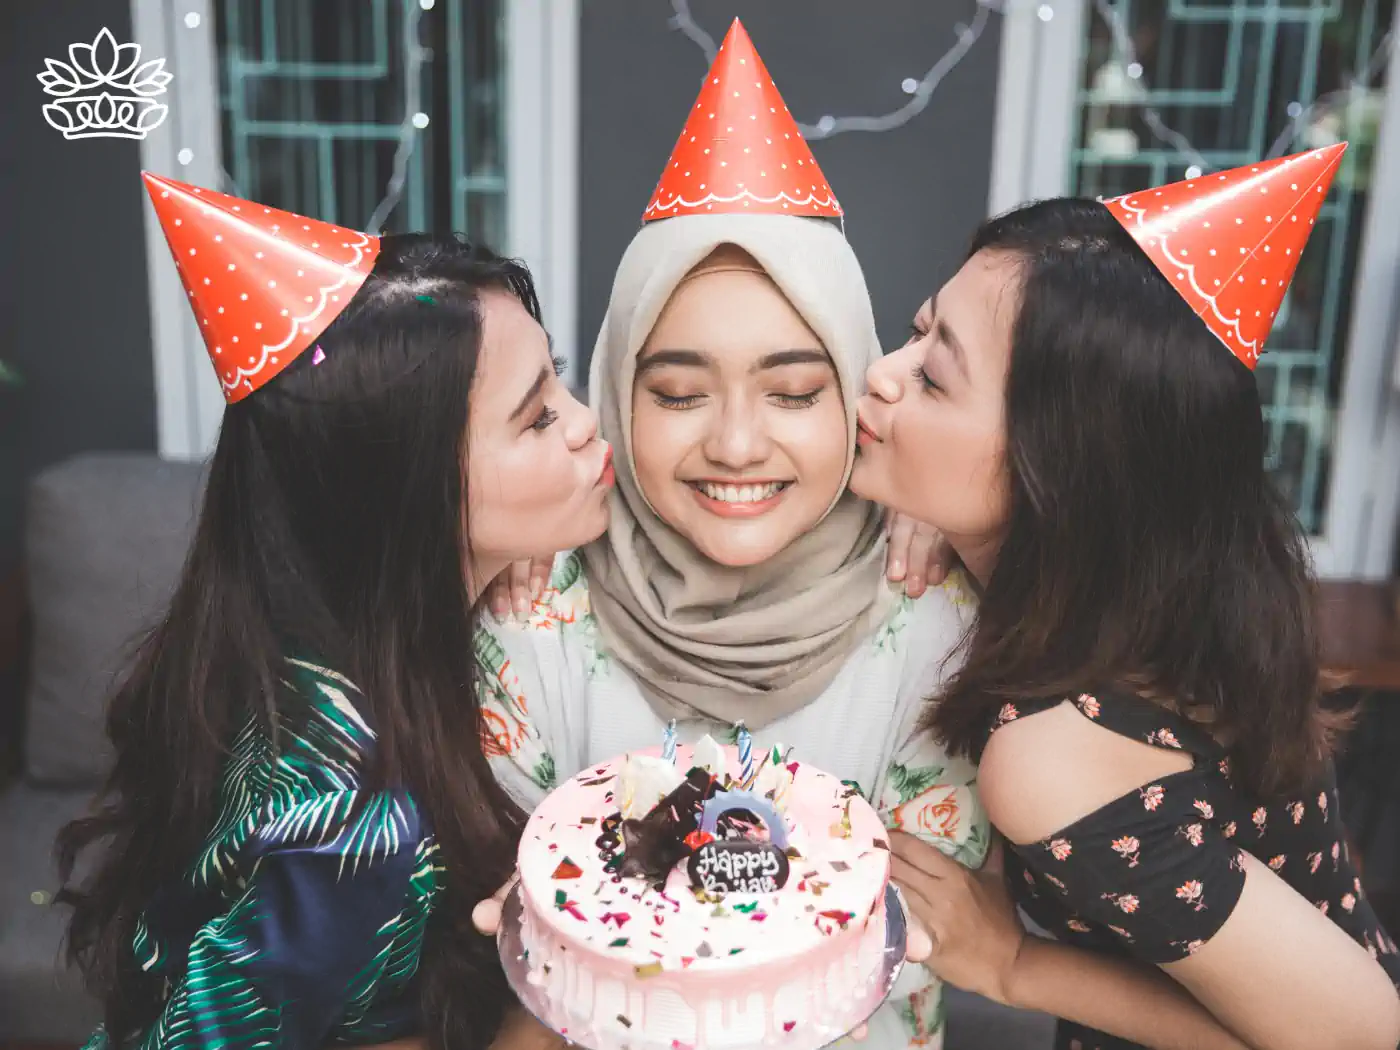 Two women wearing party hats kissing another woman on the cheeks as she holds a birthday cake, all smiling. Fabulous Flowers and Gifts.